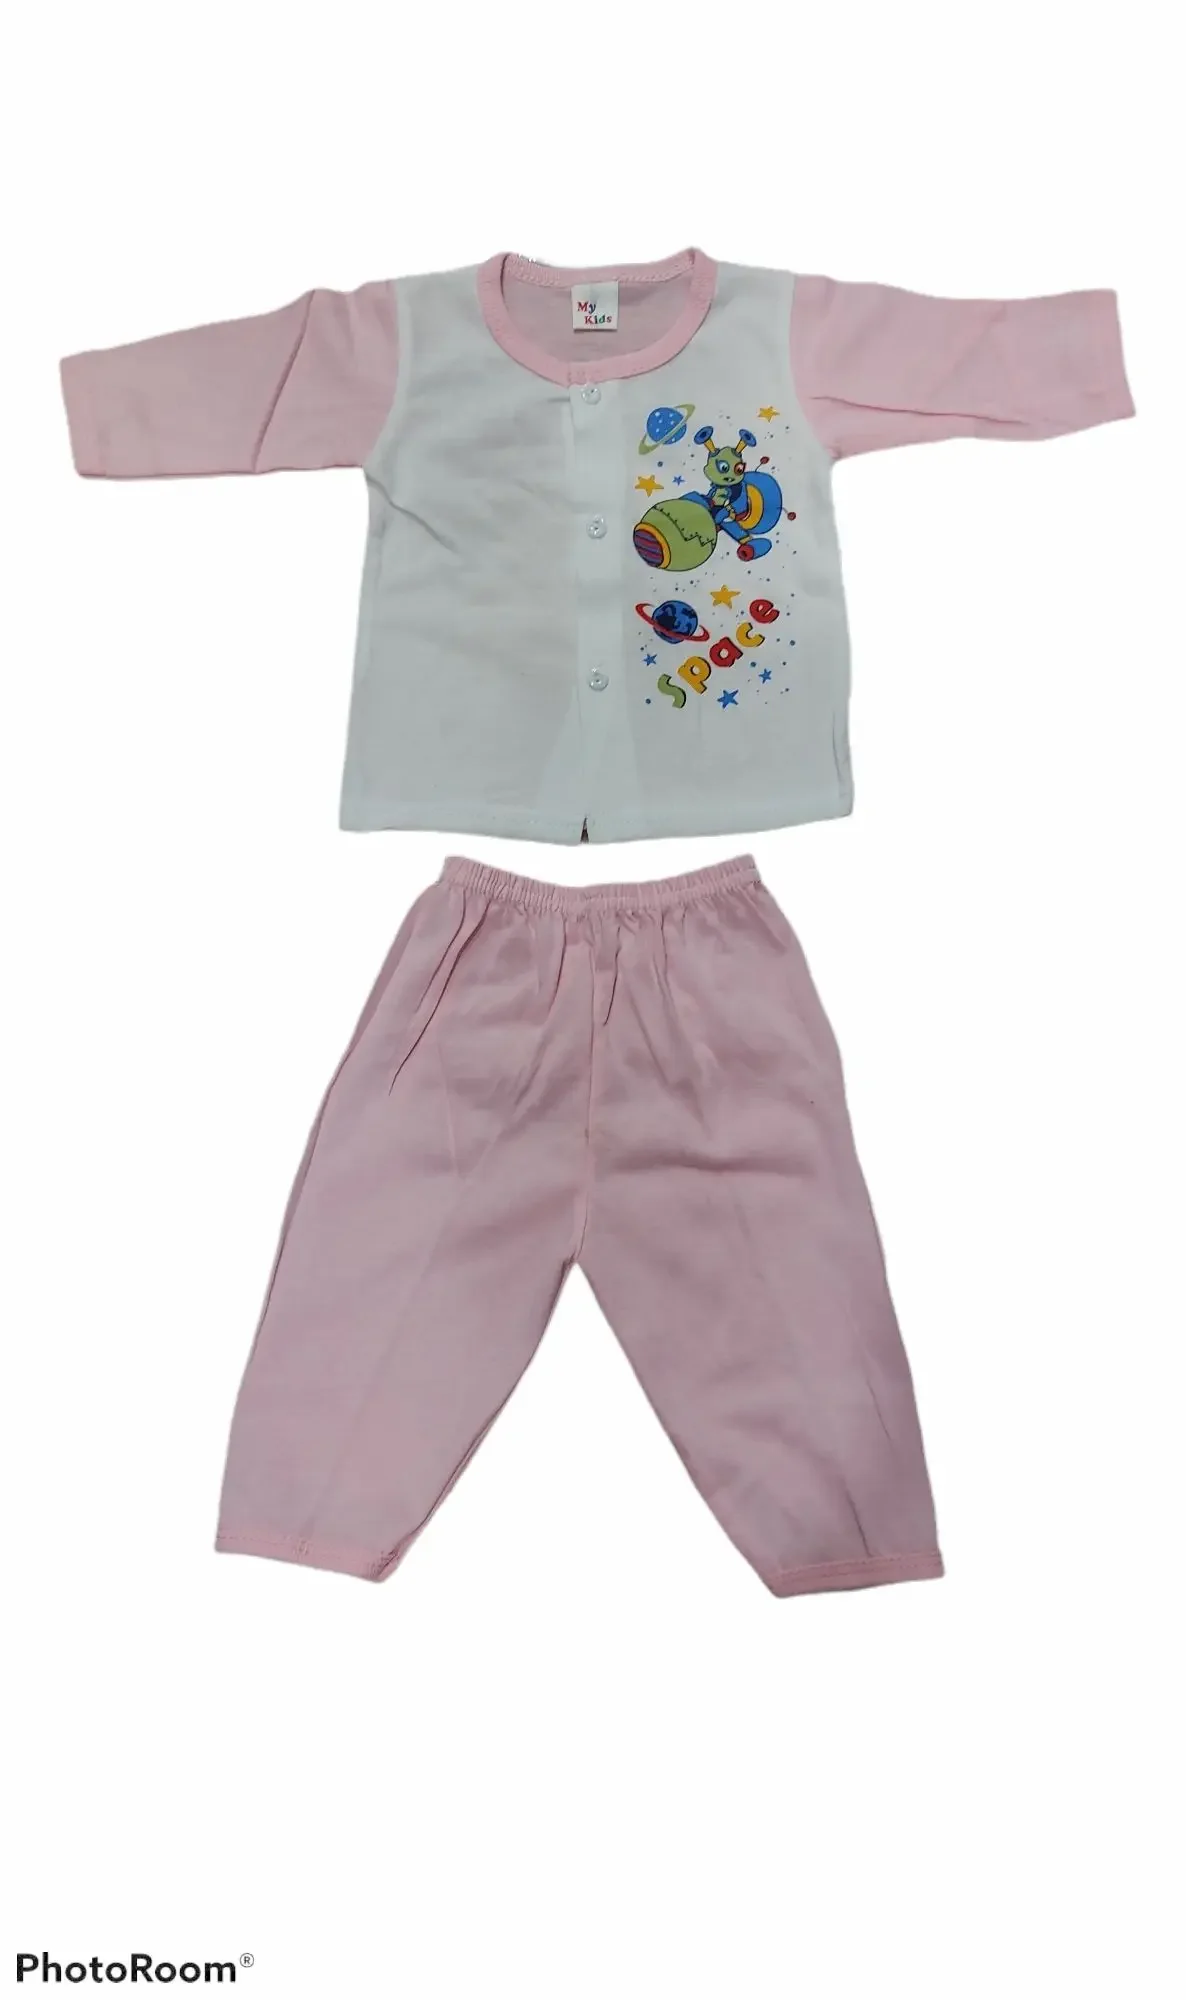 NEW BORN BABY CLOTHES SET NEW BORN 0 MONTH - 6 MONTH BAJU BABY MYKIDS (3)